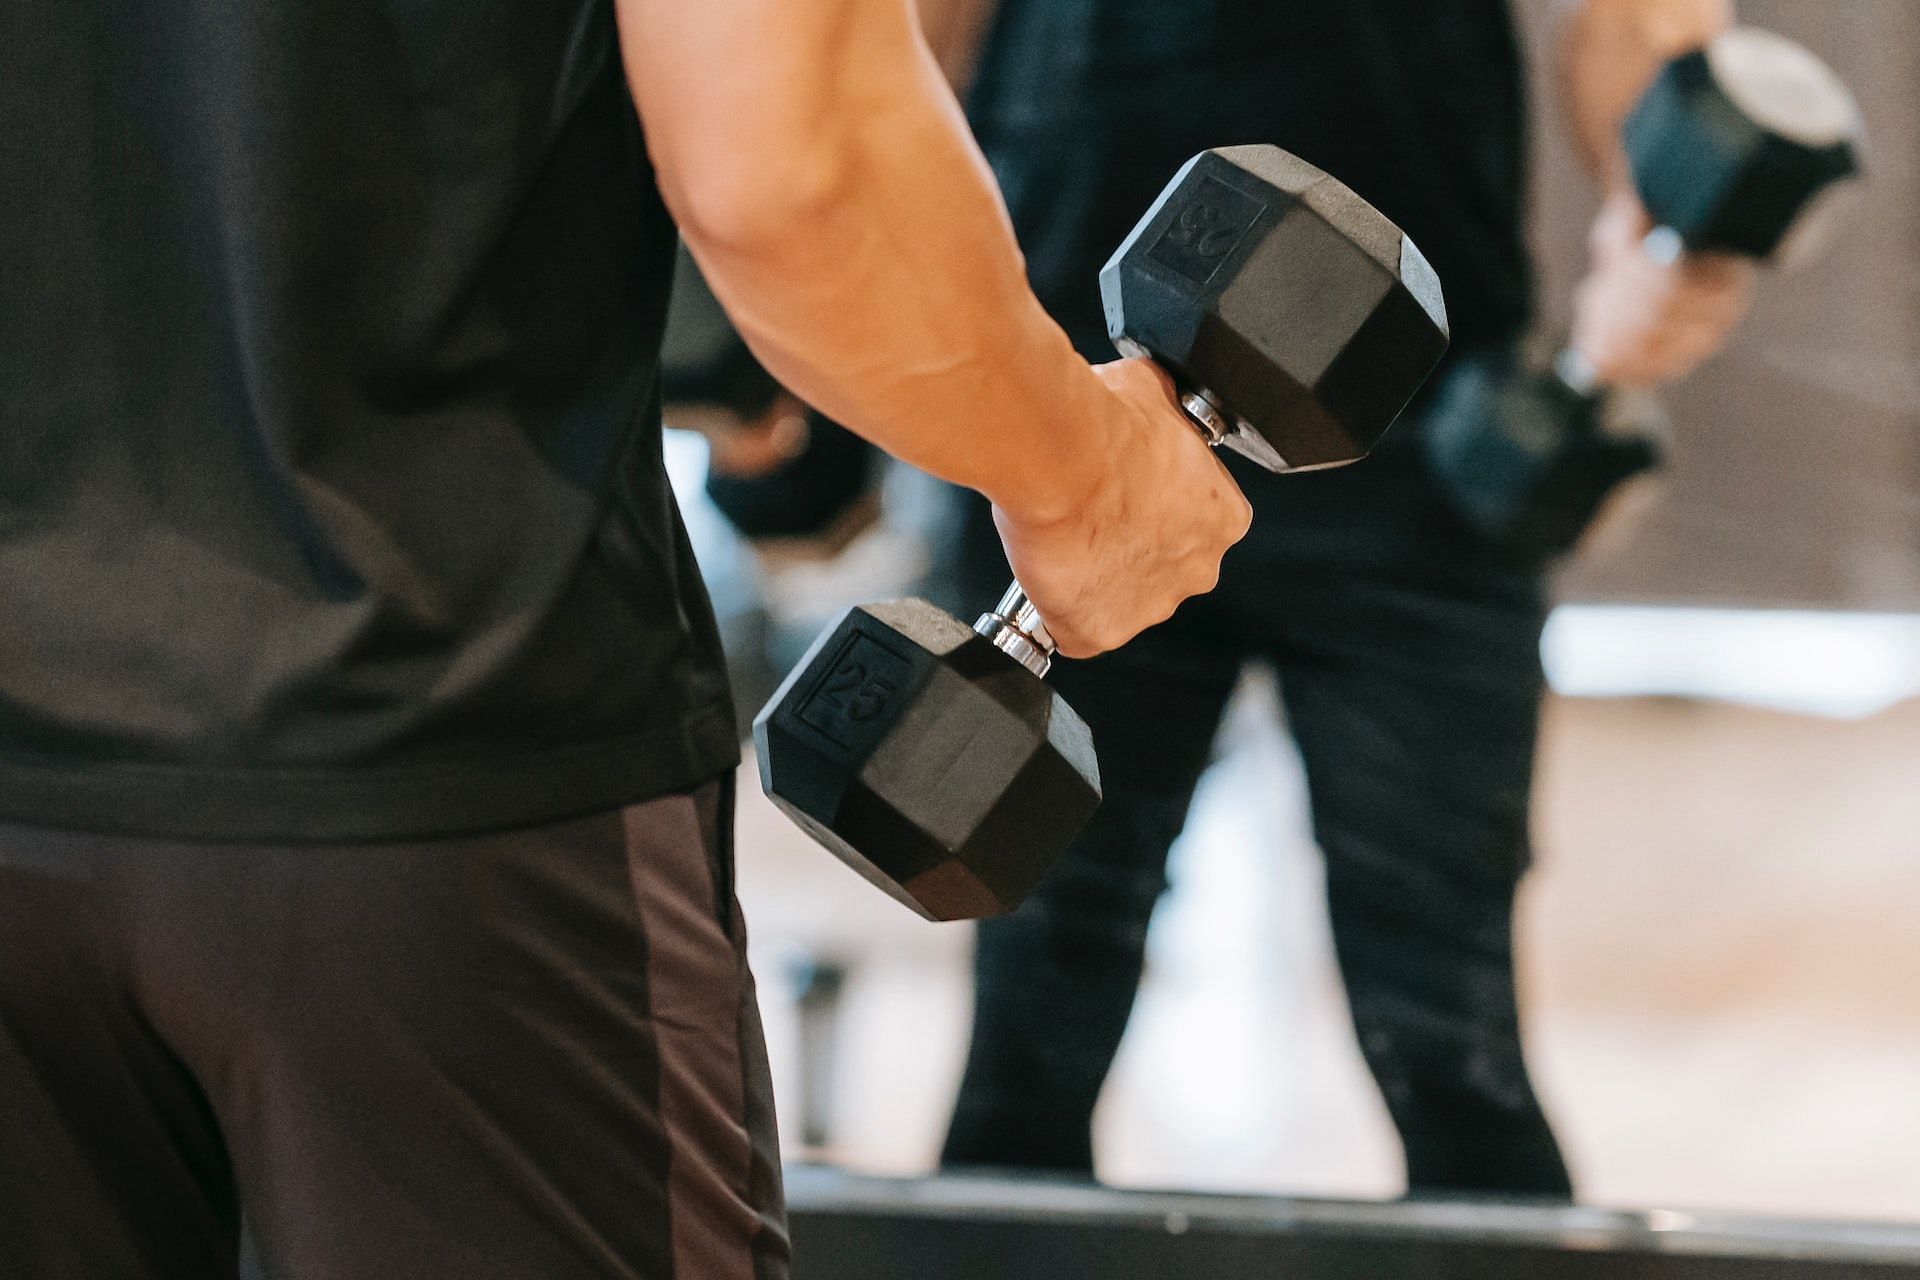 Dumbbells make an incredible chest workout tool. (Photo via Pexels/Andres Ayrton)